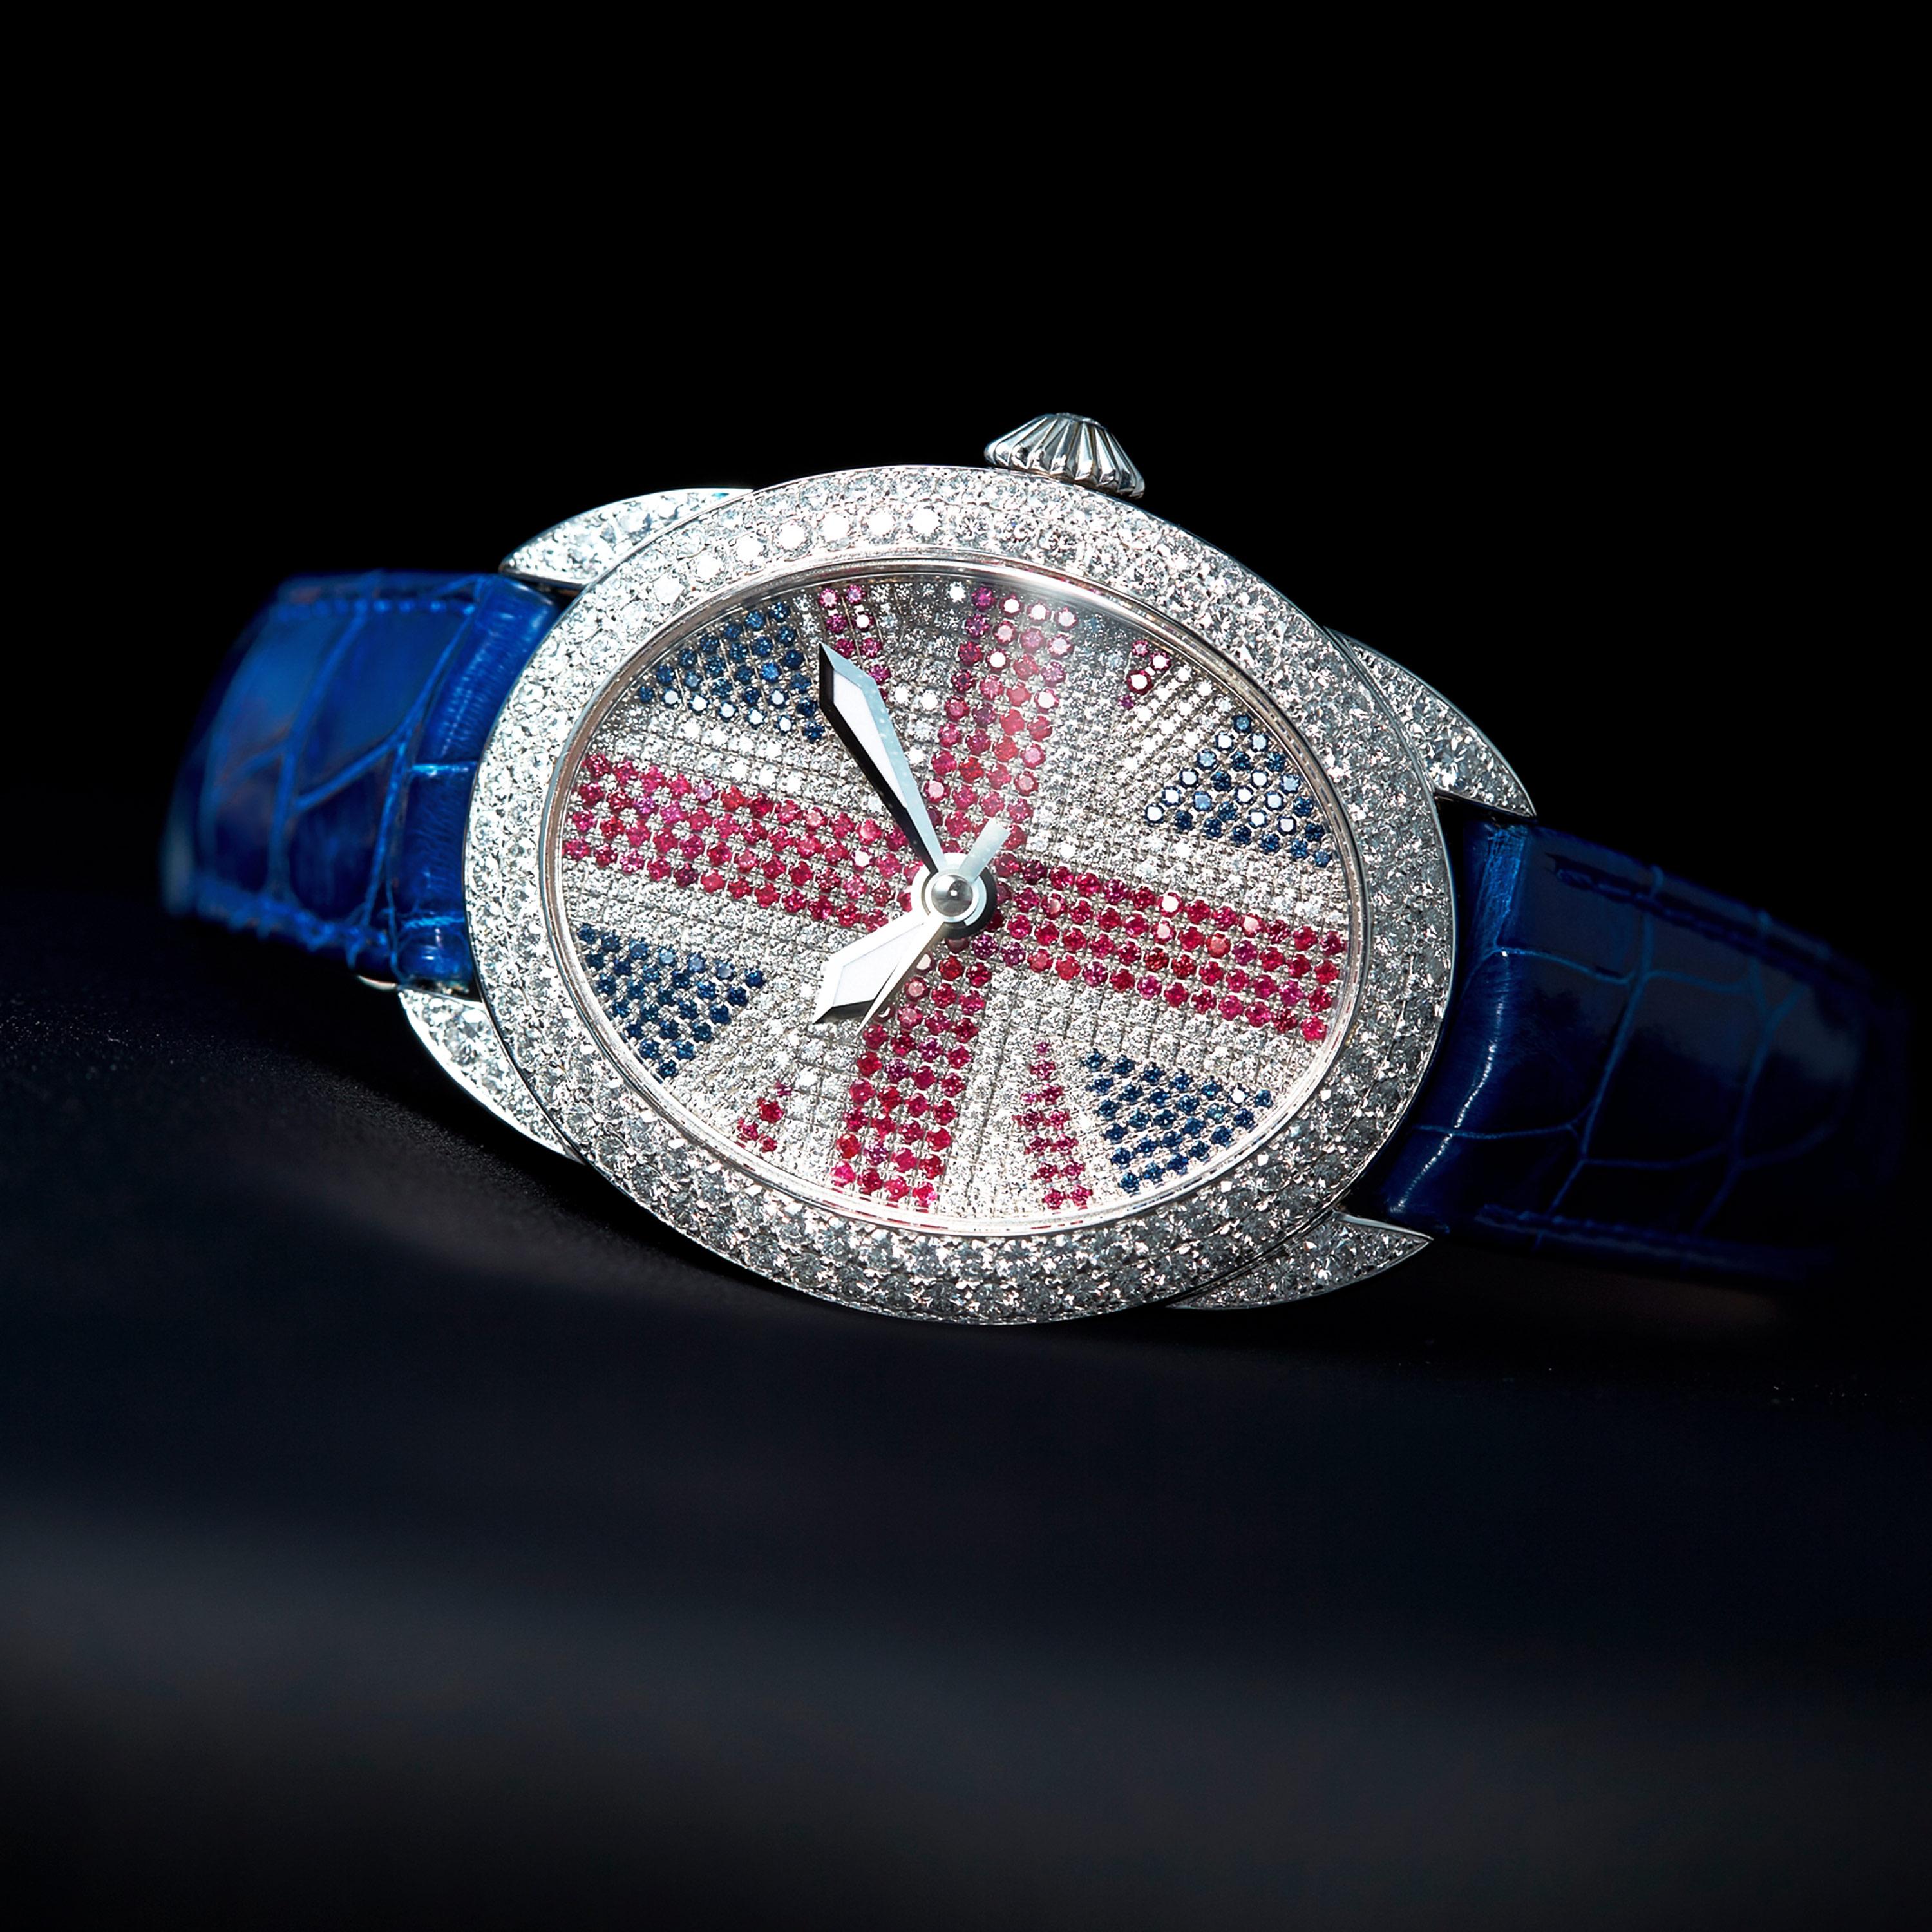 Regent Brexit 4047 is a luxury diamond watch for men crafted in Stainless Steel, featuring white oval dial, union jack motif set with rubies and sapphires, automatic movement. The case, dial and crown are set with white diamonds, red rubies and blue